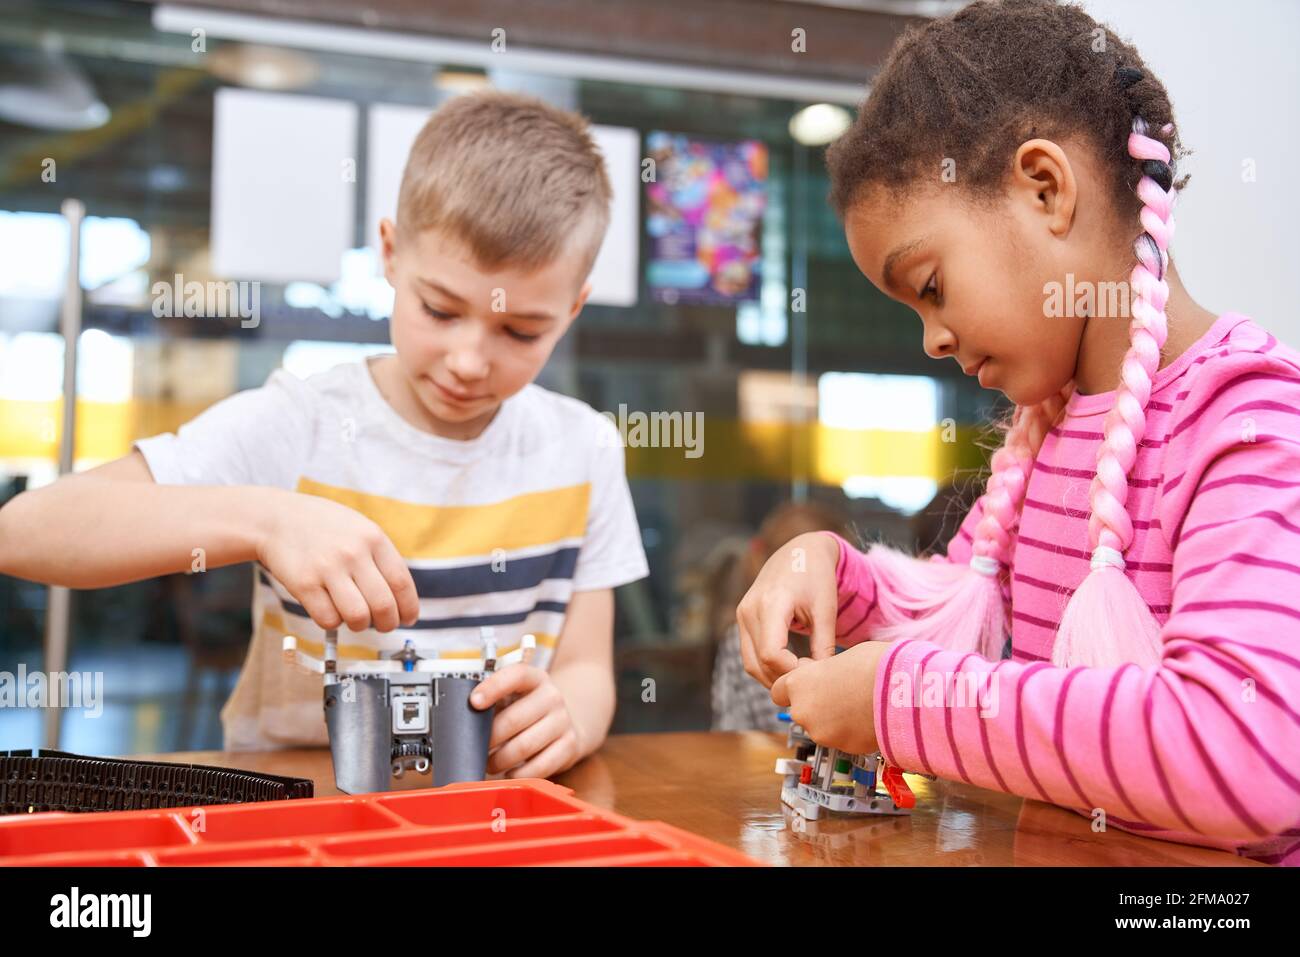 Building kit for group of multiracial kids creating toys. Close up of concentrated african girl and caucasian boy working on project, having positive emotions. Concept of science engineering. Stock Photo